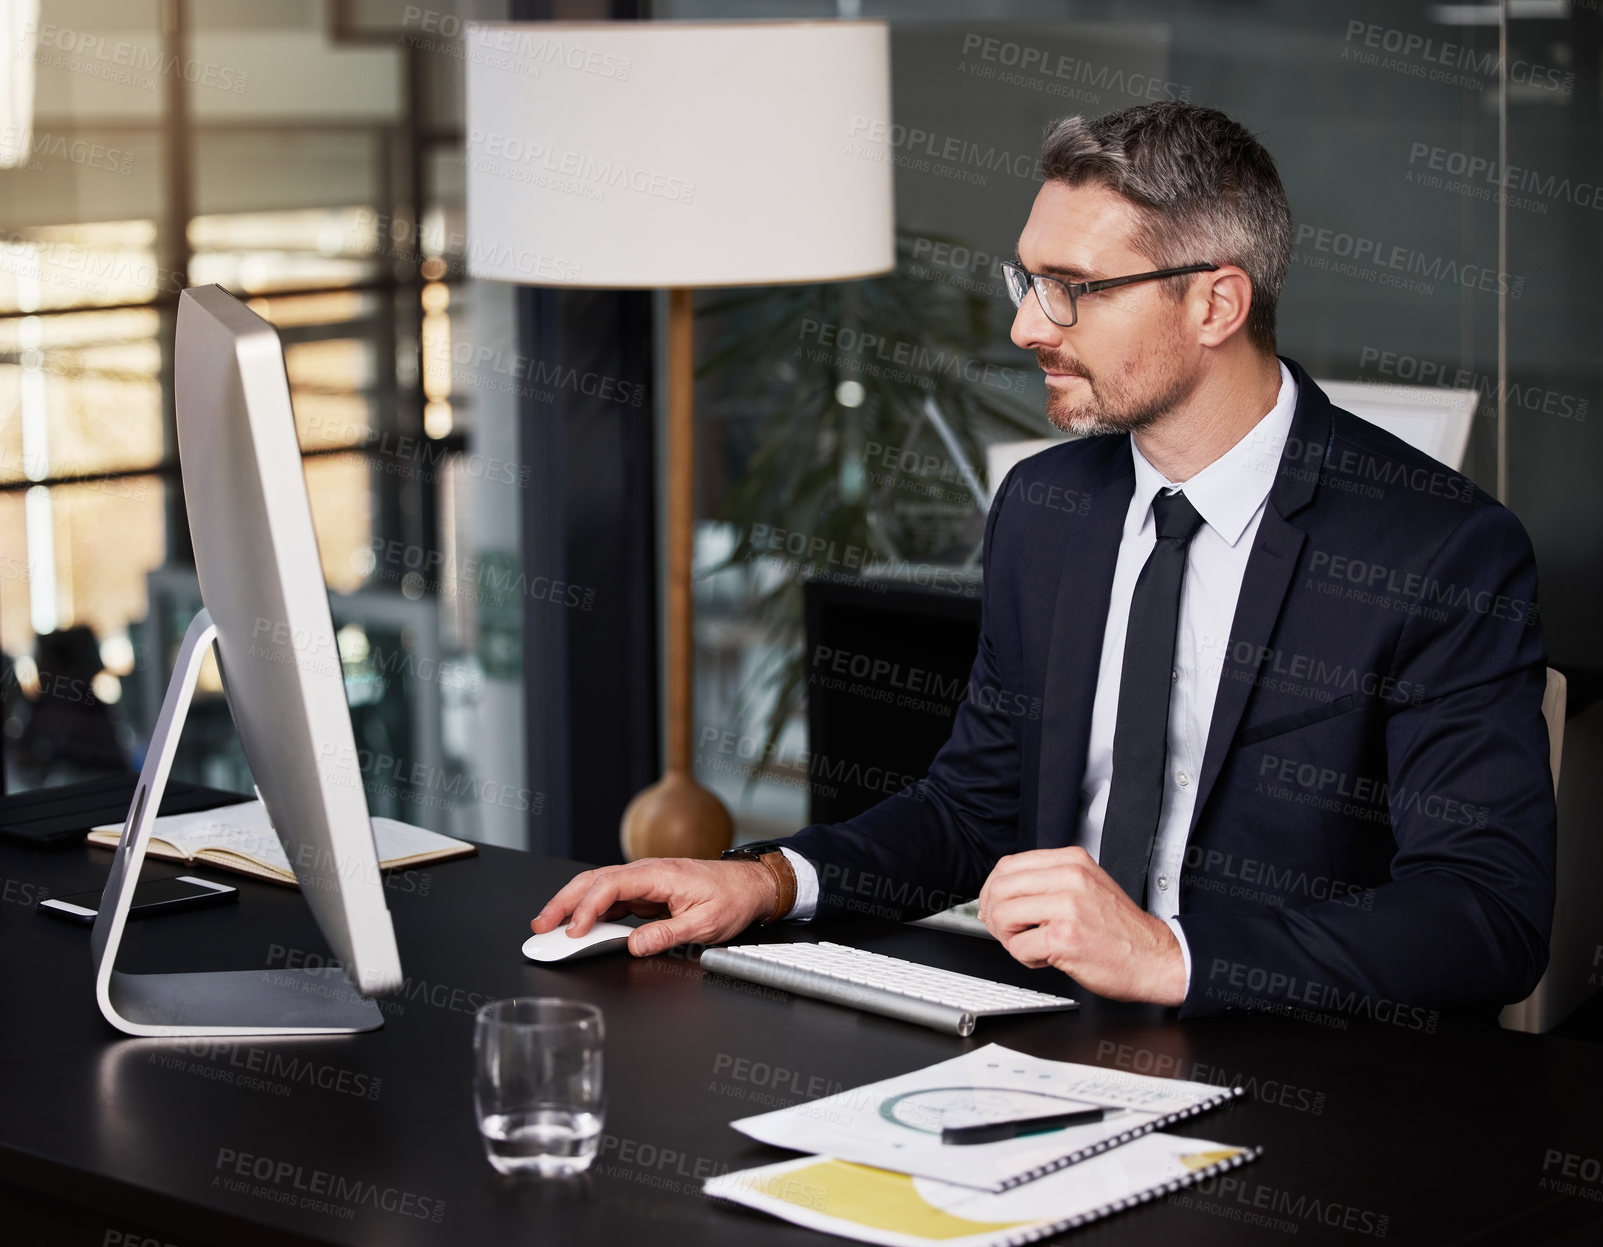 Buy stock photo Shot of a businessman using his computer while sitting at his desk